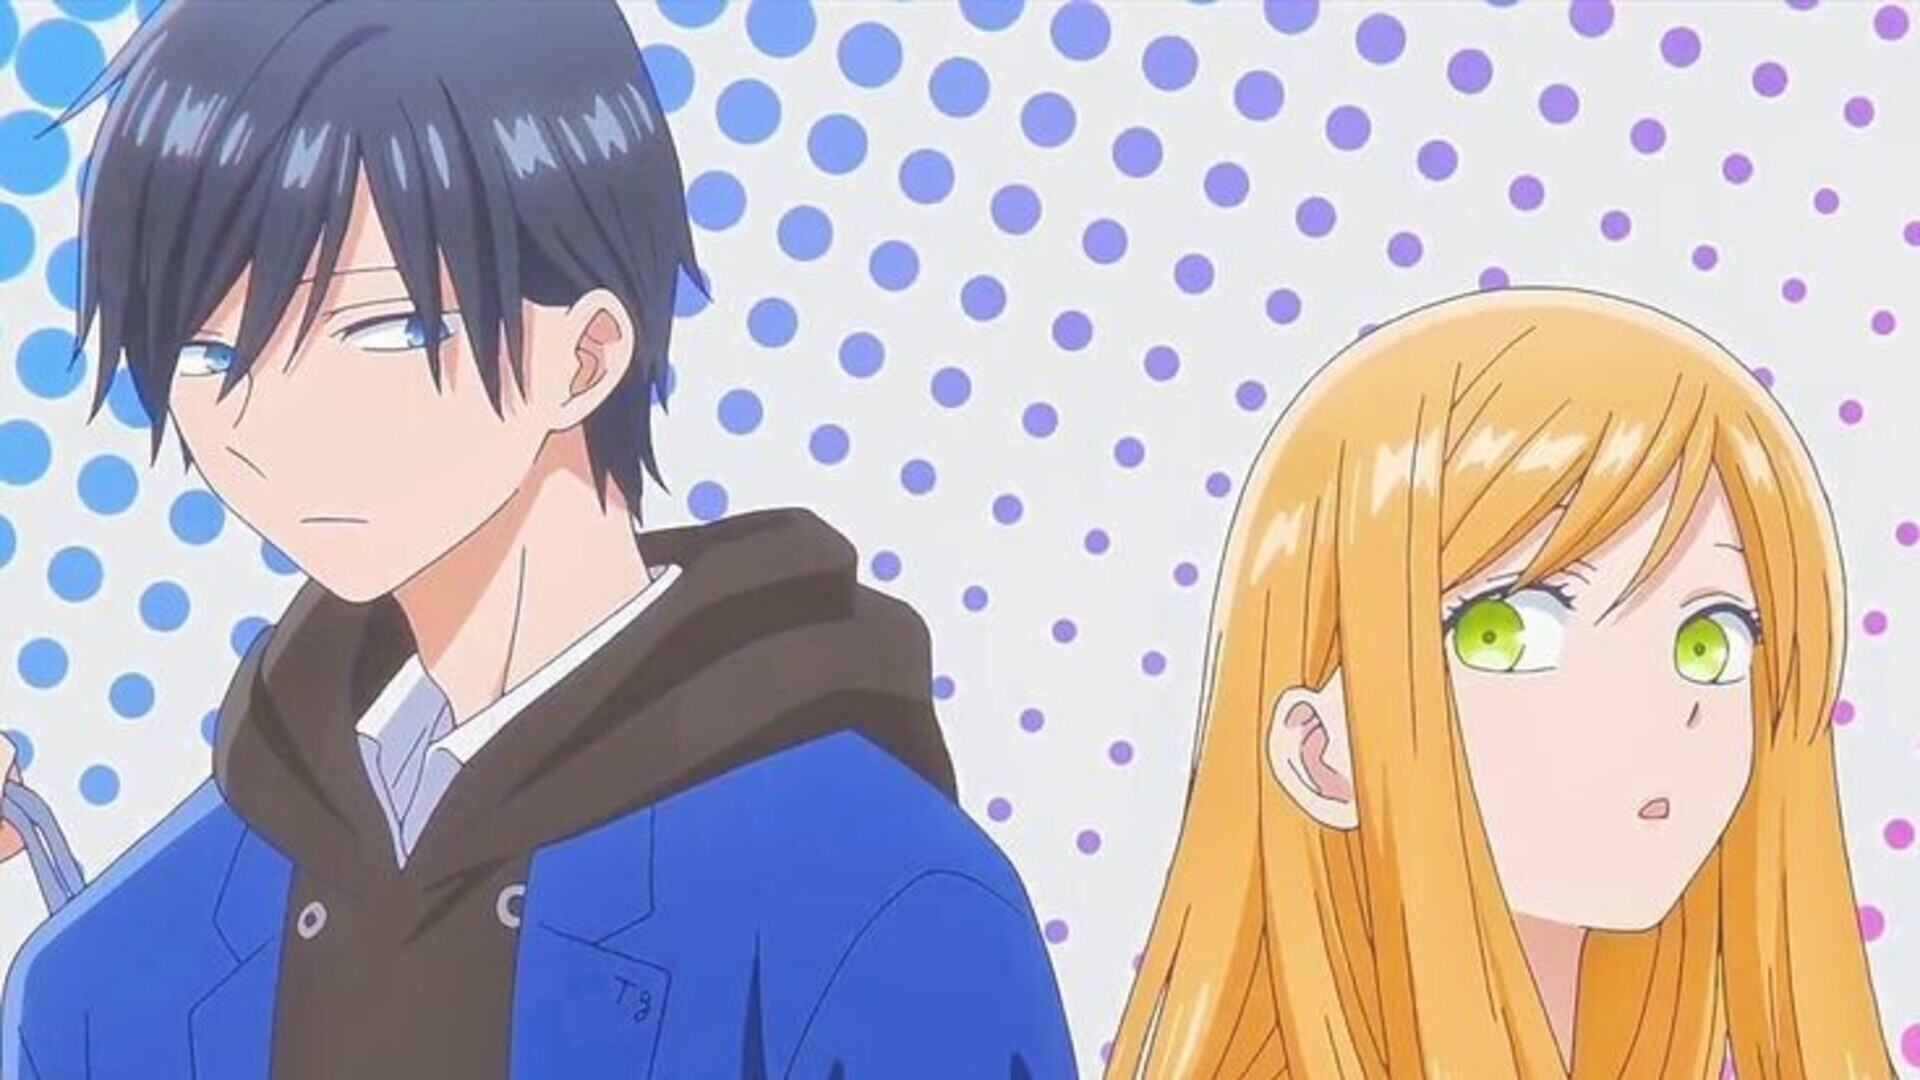 My Lv999 Love For Yamada-Kun Chapter 97: Release Date, Spoilers & Where to Read?